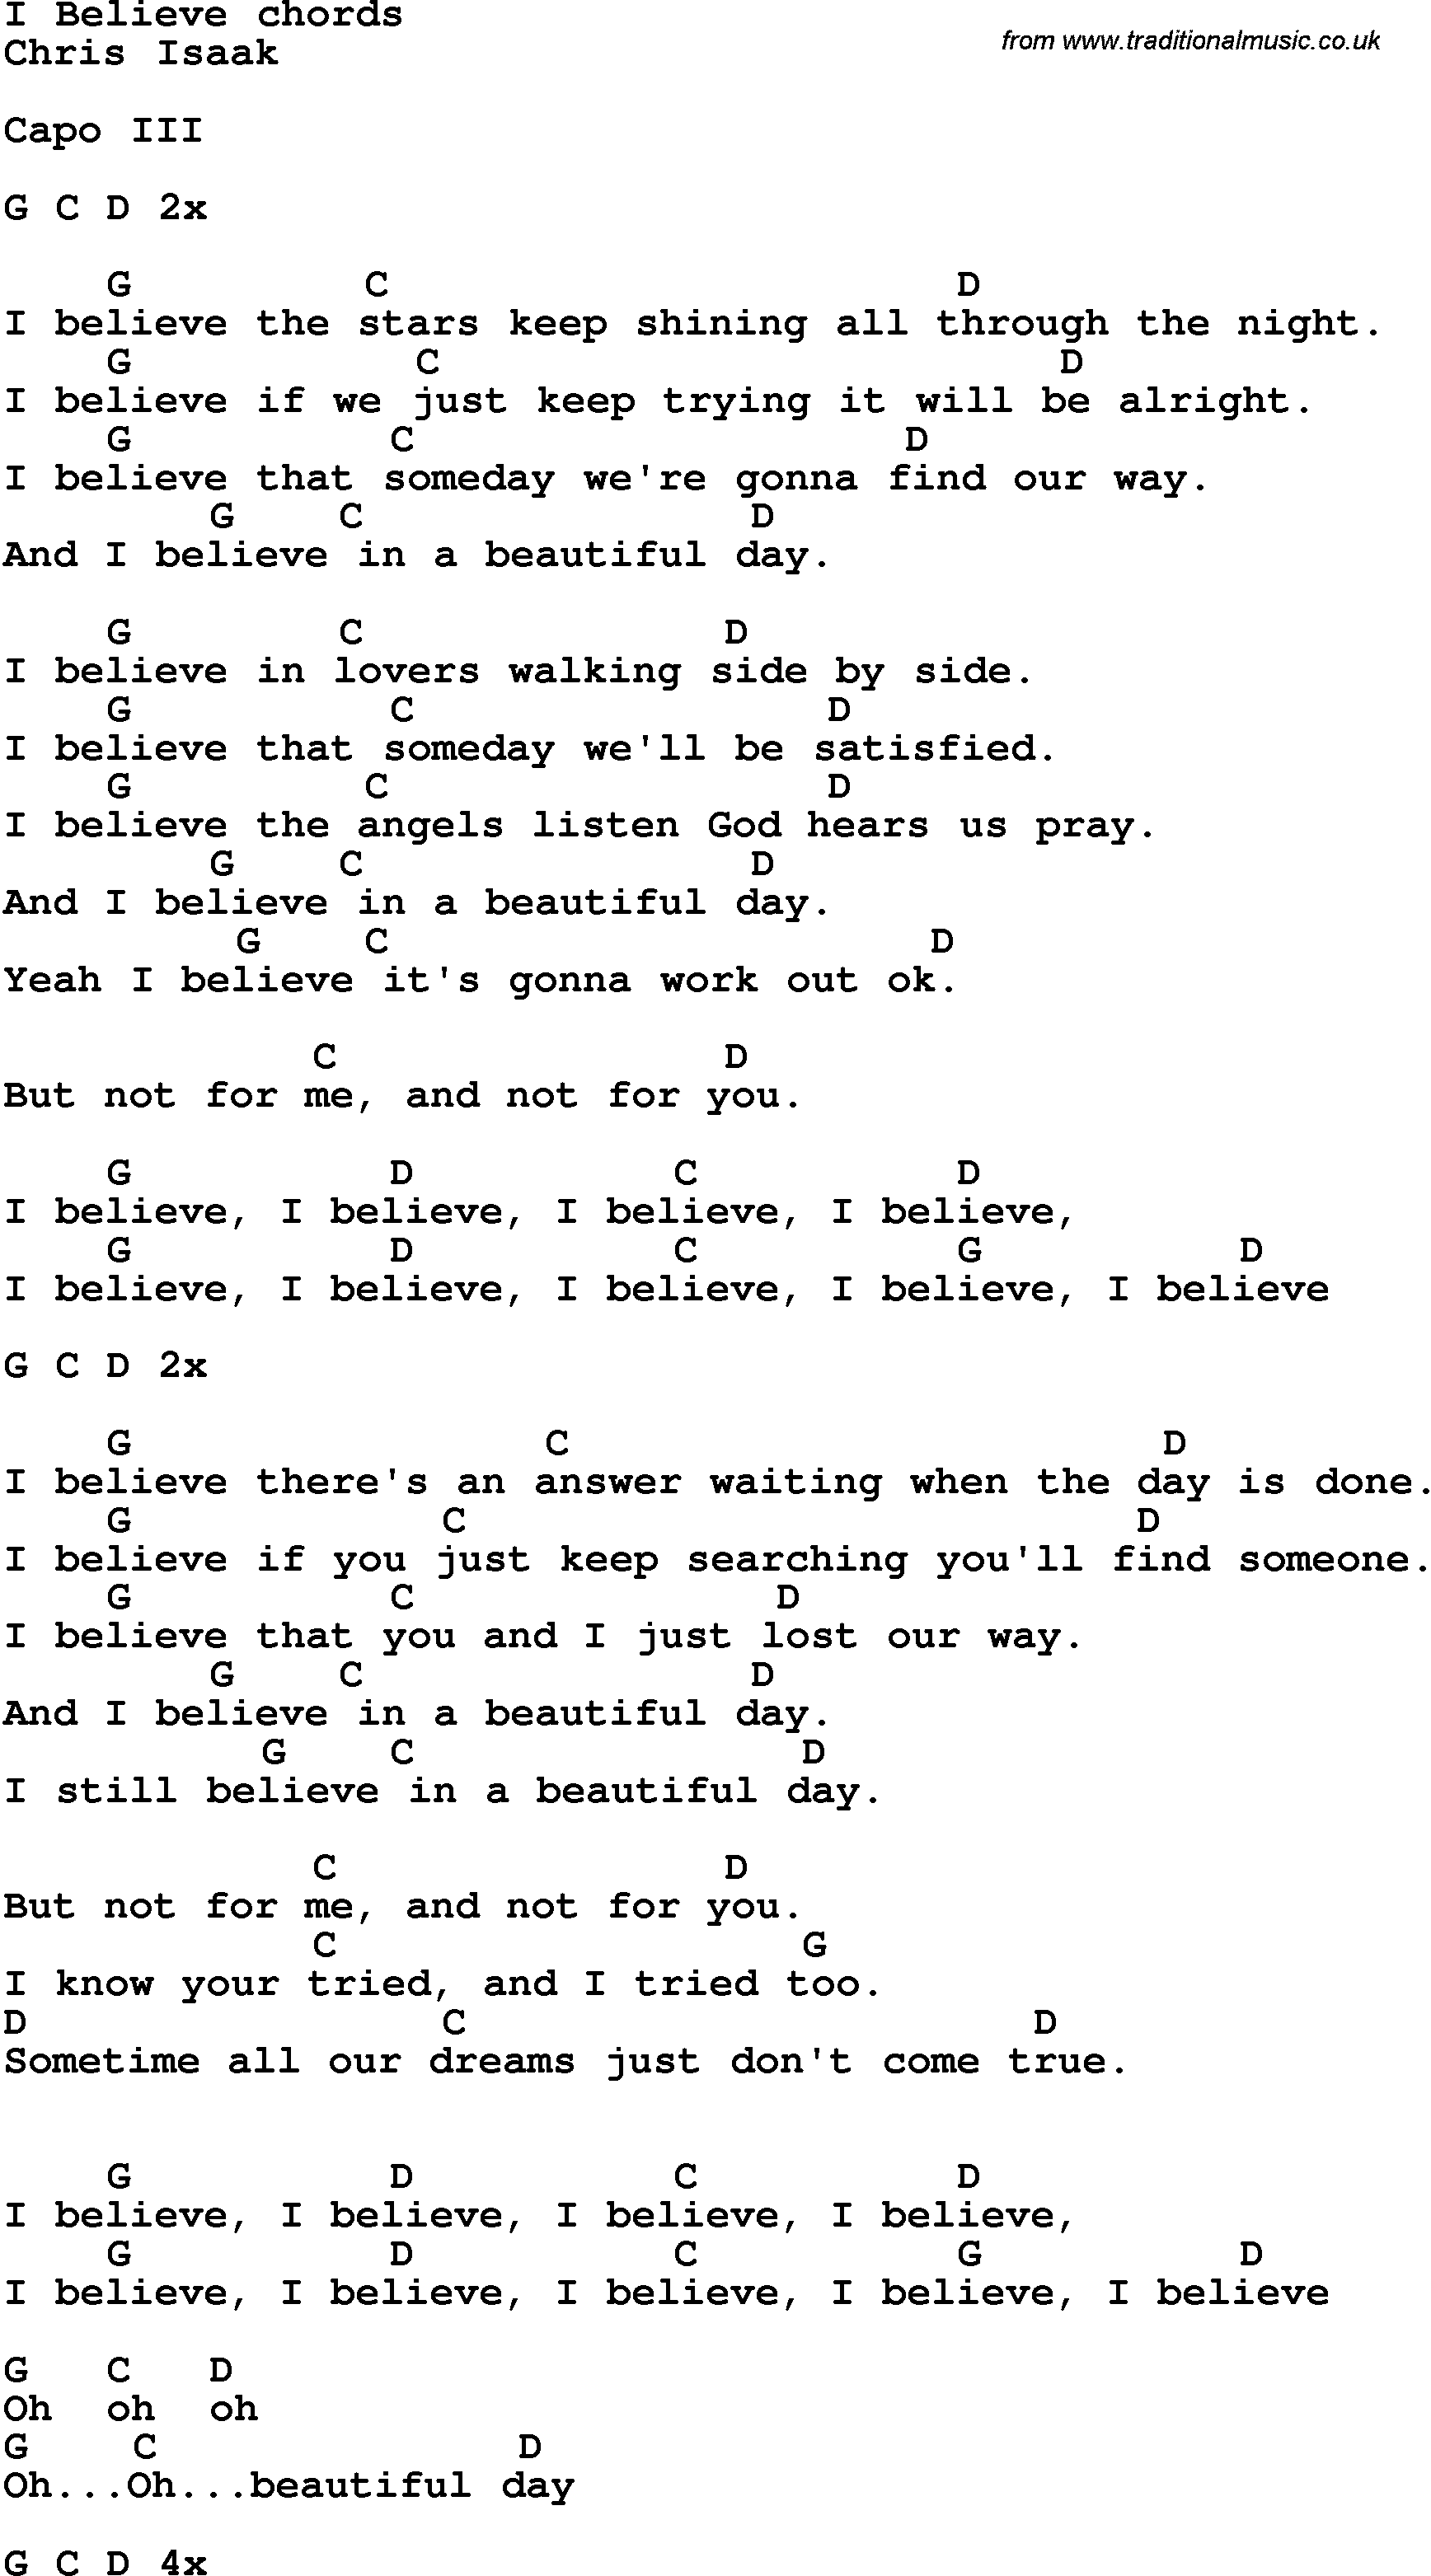 Song Lyrics with guitar chords for I Believe